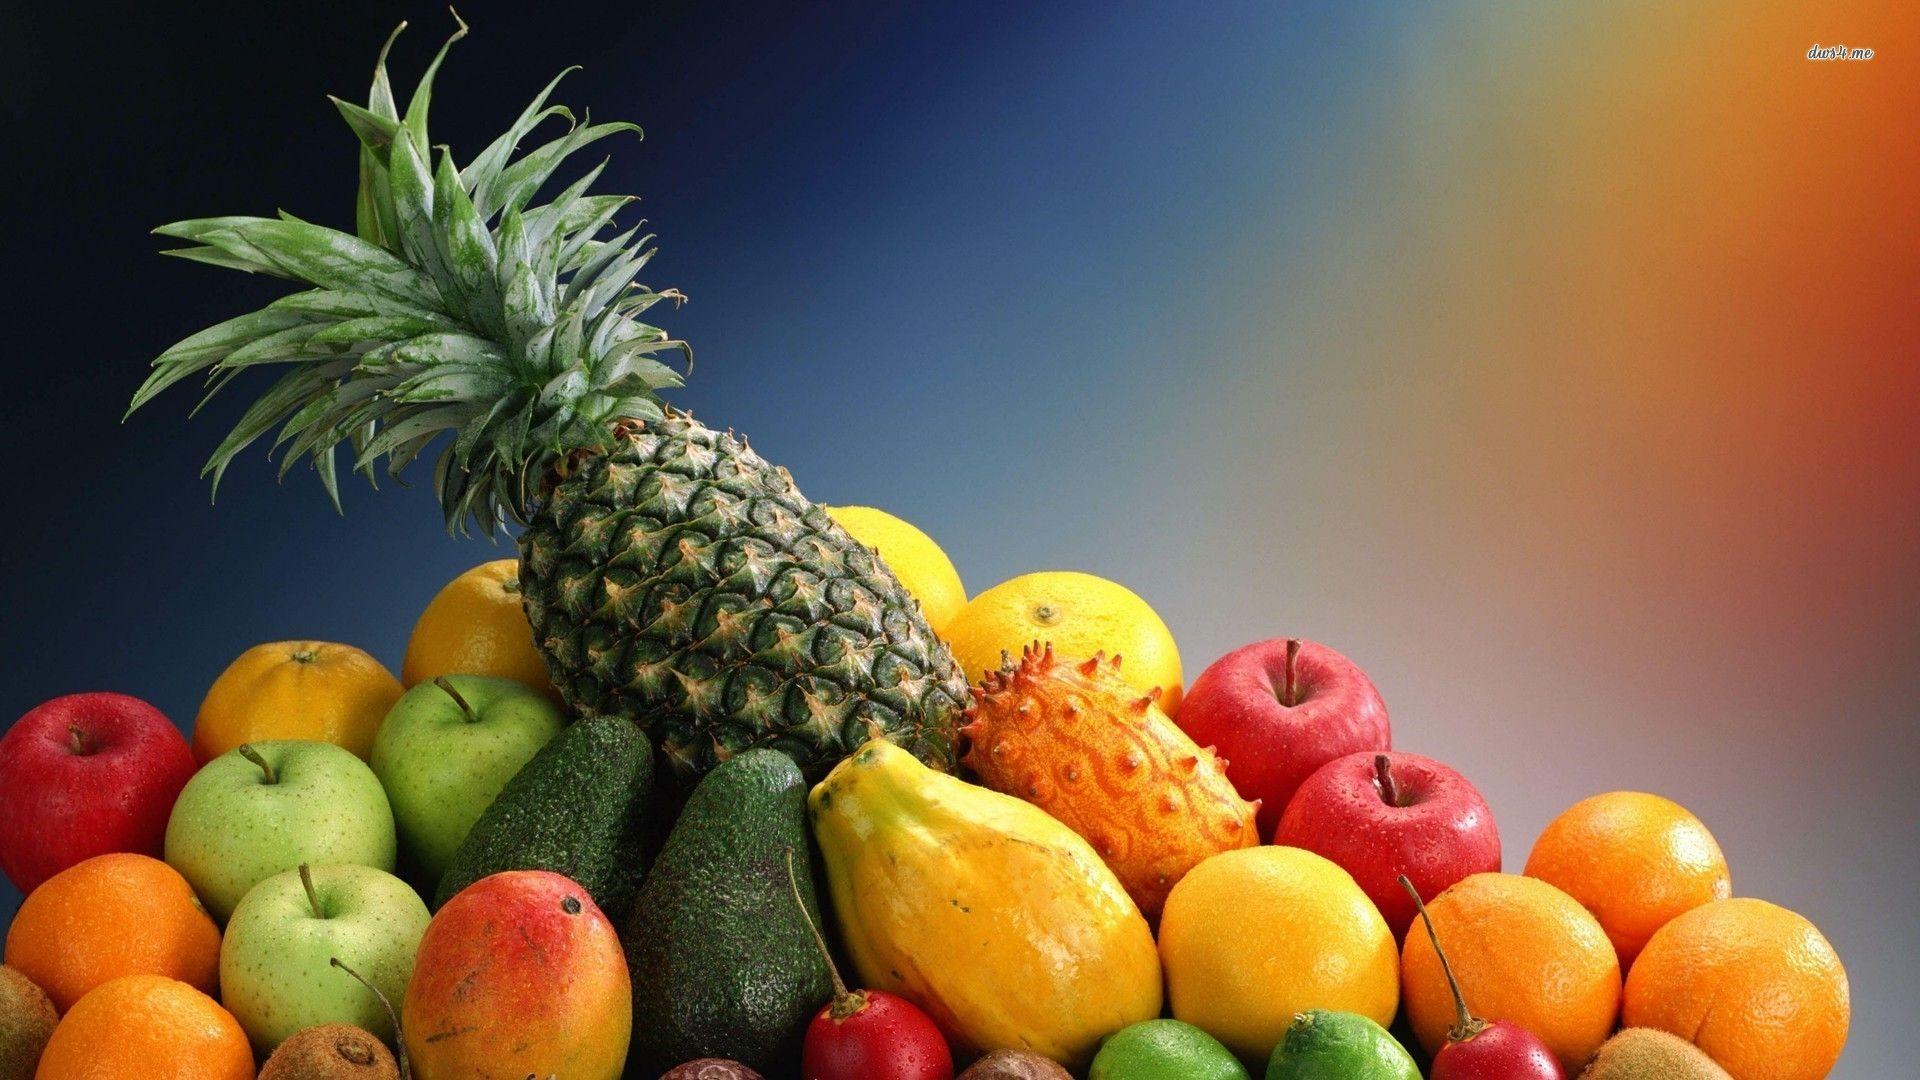 List Of Tropical Fruits HD Wallpaper, Background Image